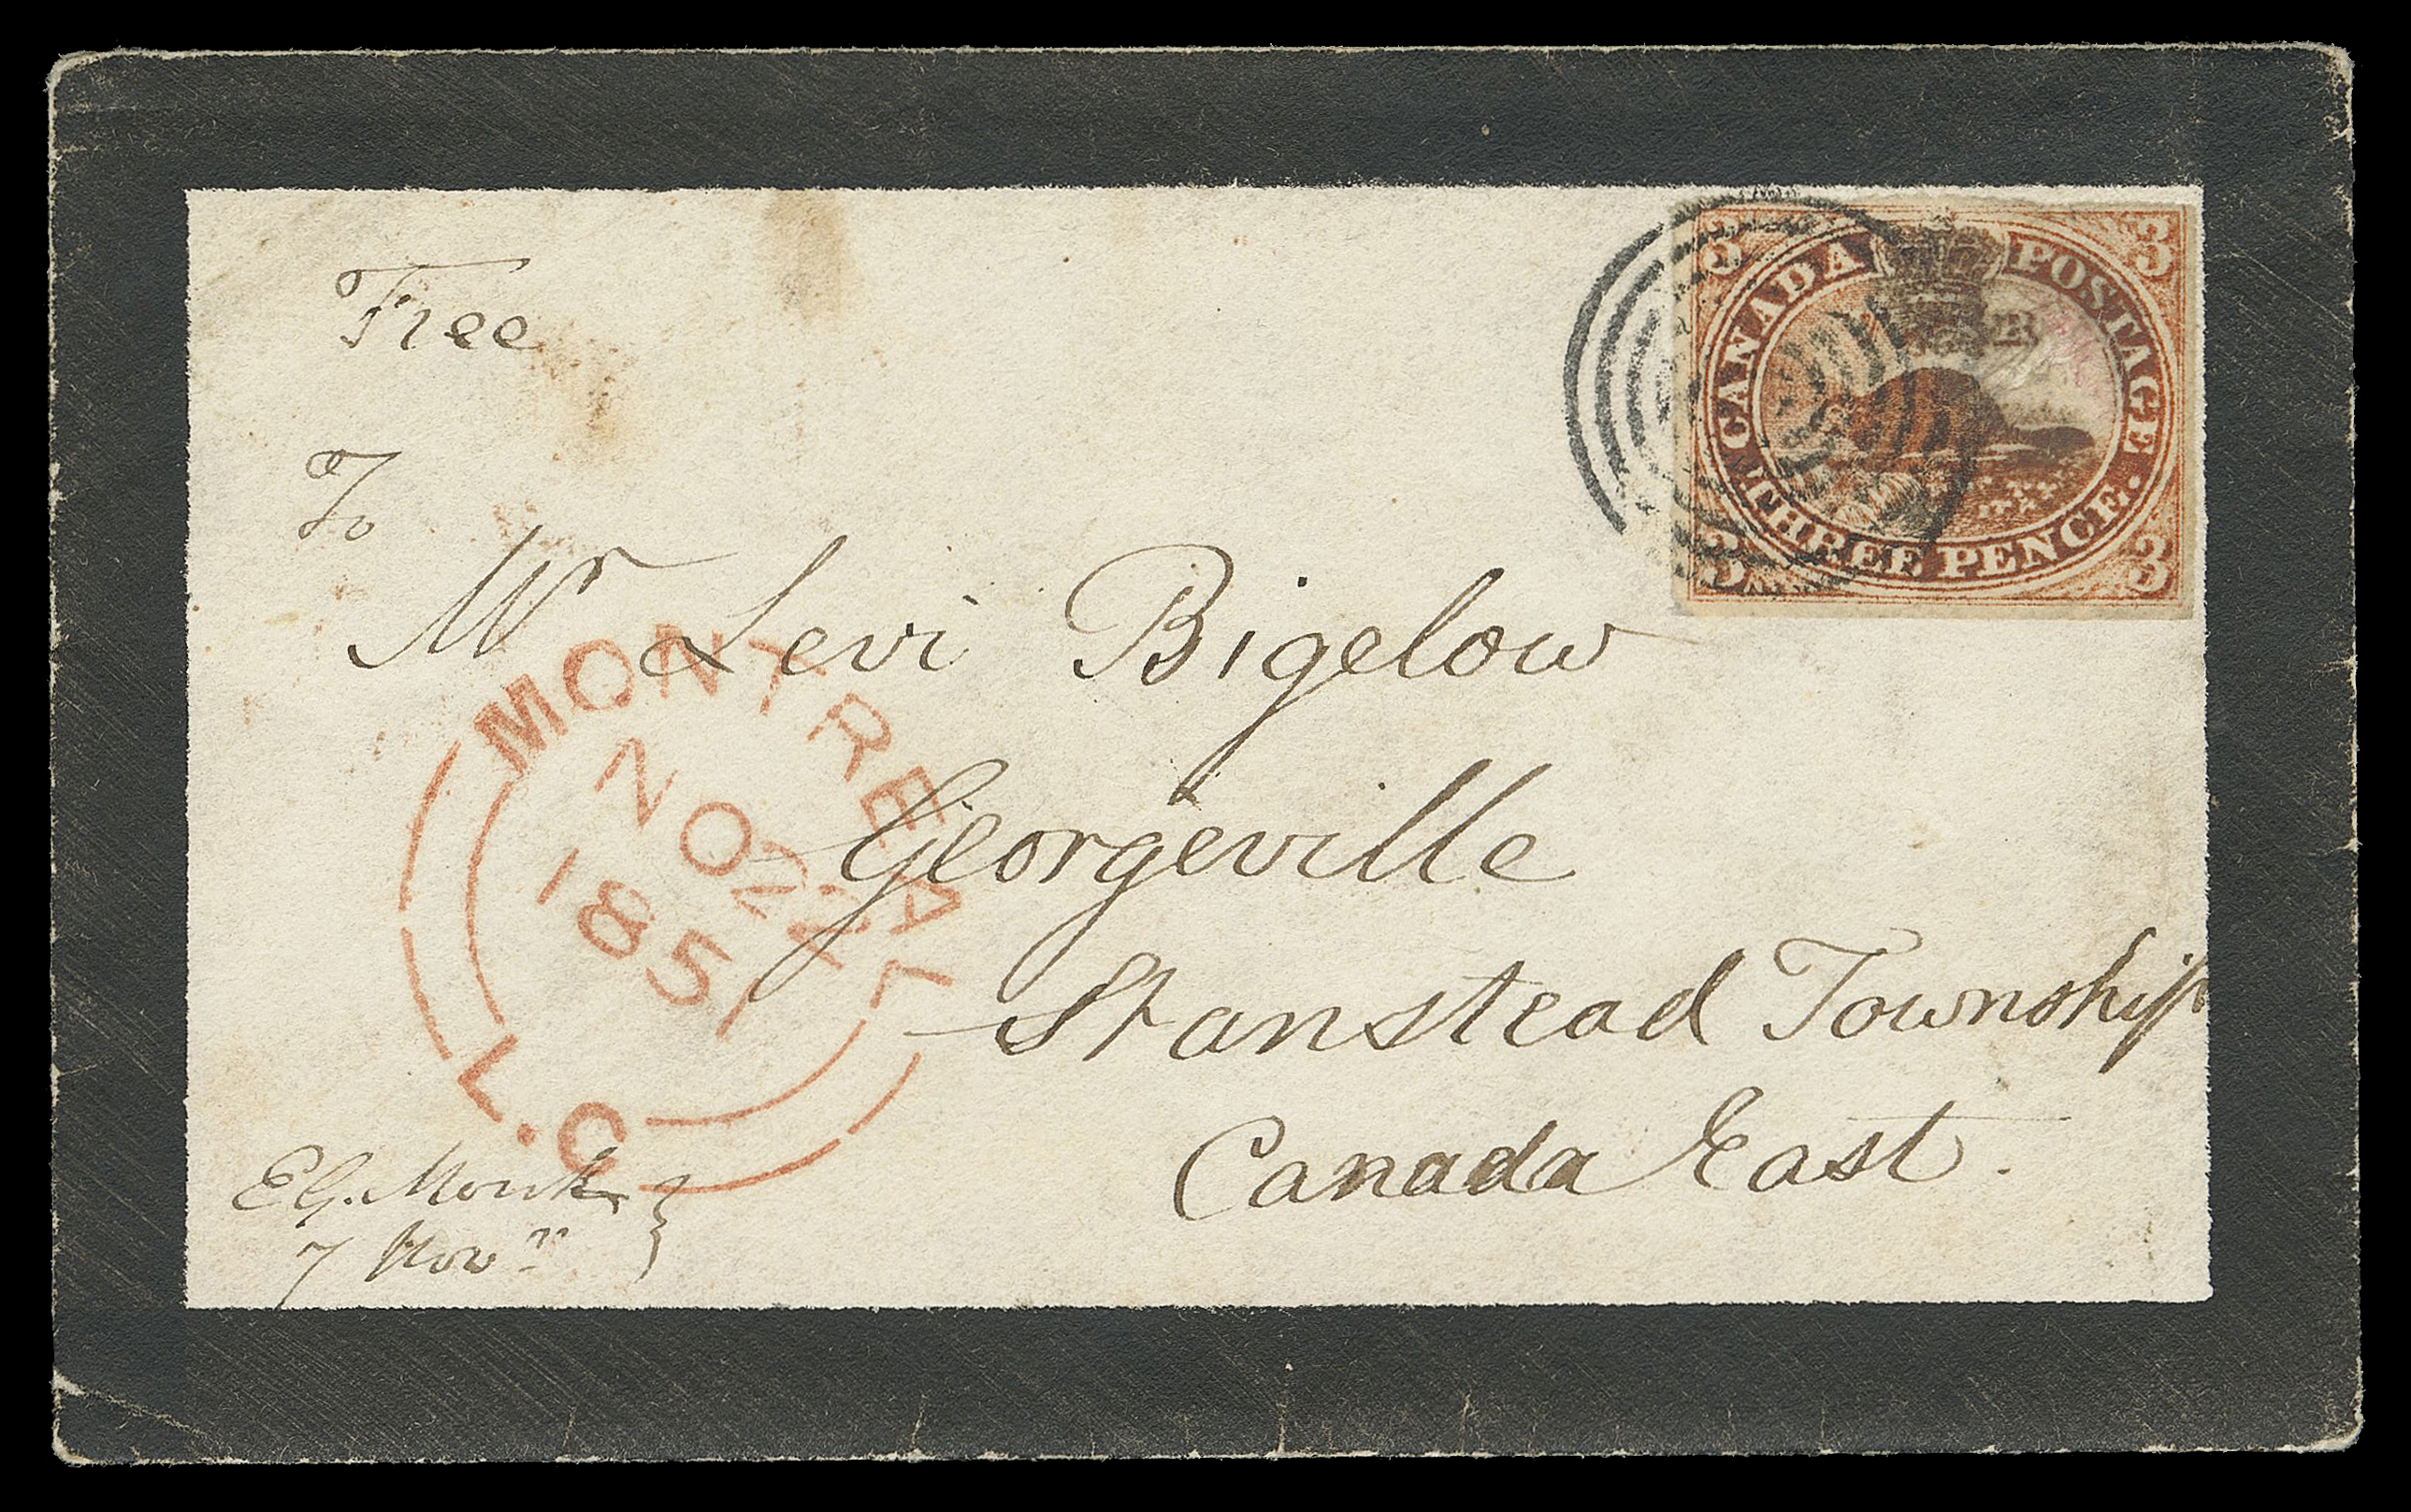 THREE PENCE AND FIVE CENTS  1851 (November 22) Small mourning cover with letter enclosure, bearing 3p red on handmade laid paper with adequate margins except barely touching frameline at top,  paying the domestic letter rate to Georgeville C.E., negligible surface scrape to stamp which is neatly tied by concentric rings, clear Montreal double arc dispatch CDS in red, St. John L.C. transit and Georgeville stampless era double ring receiver in red with "Nov. 26" filled-in date, an appealing, early usage of the 3 pence, F-VF (Unitrade 1)

Expertization: 1998 PF certificate